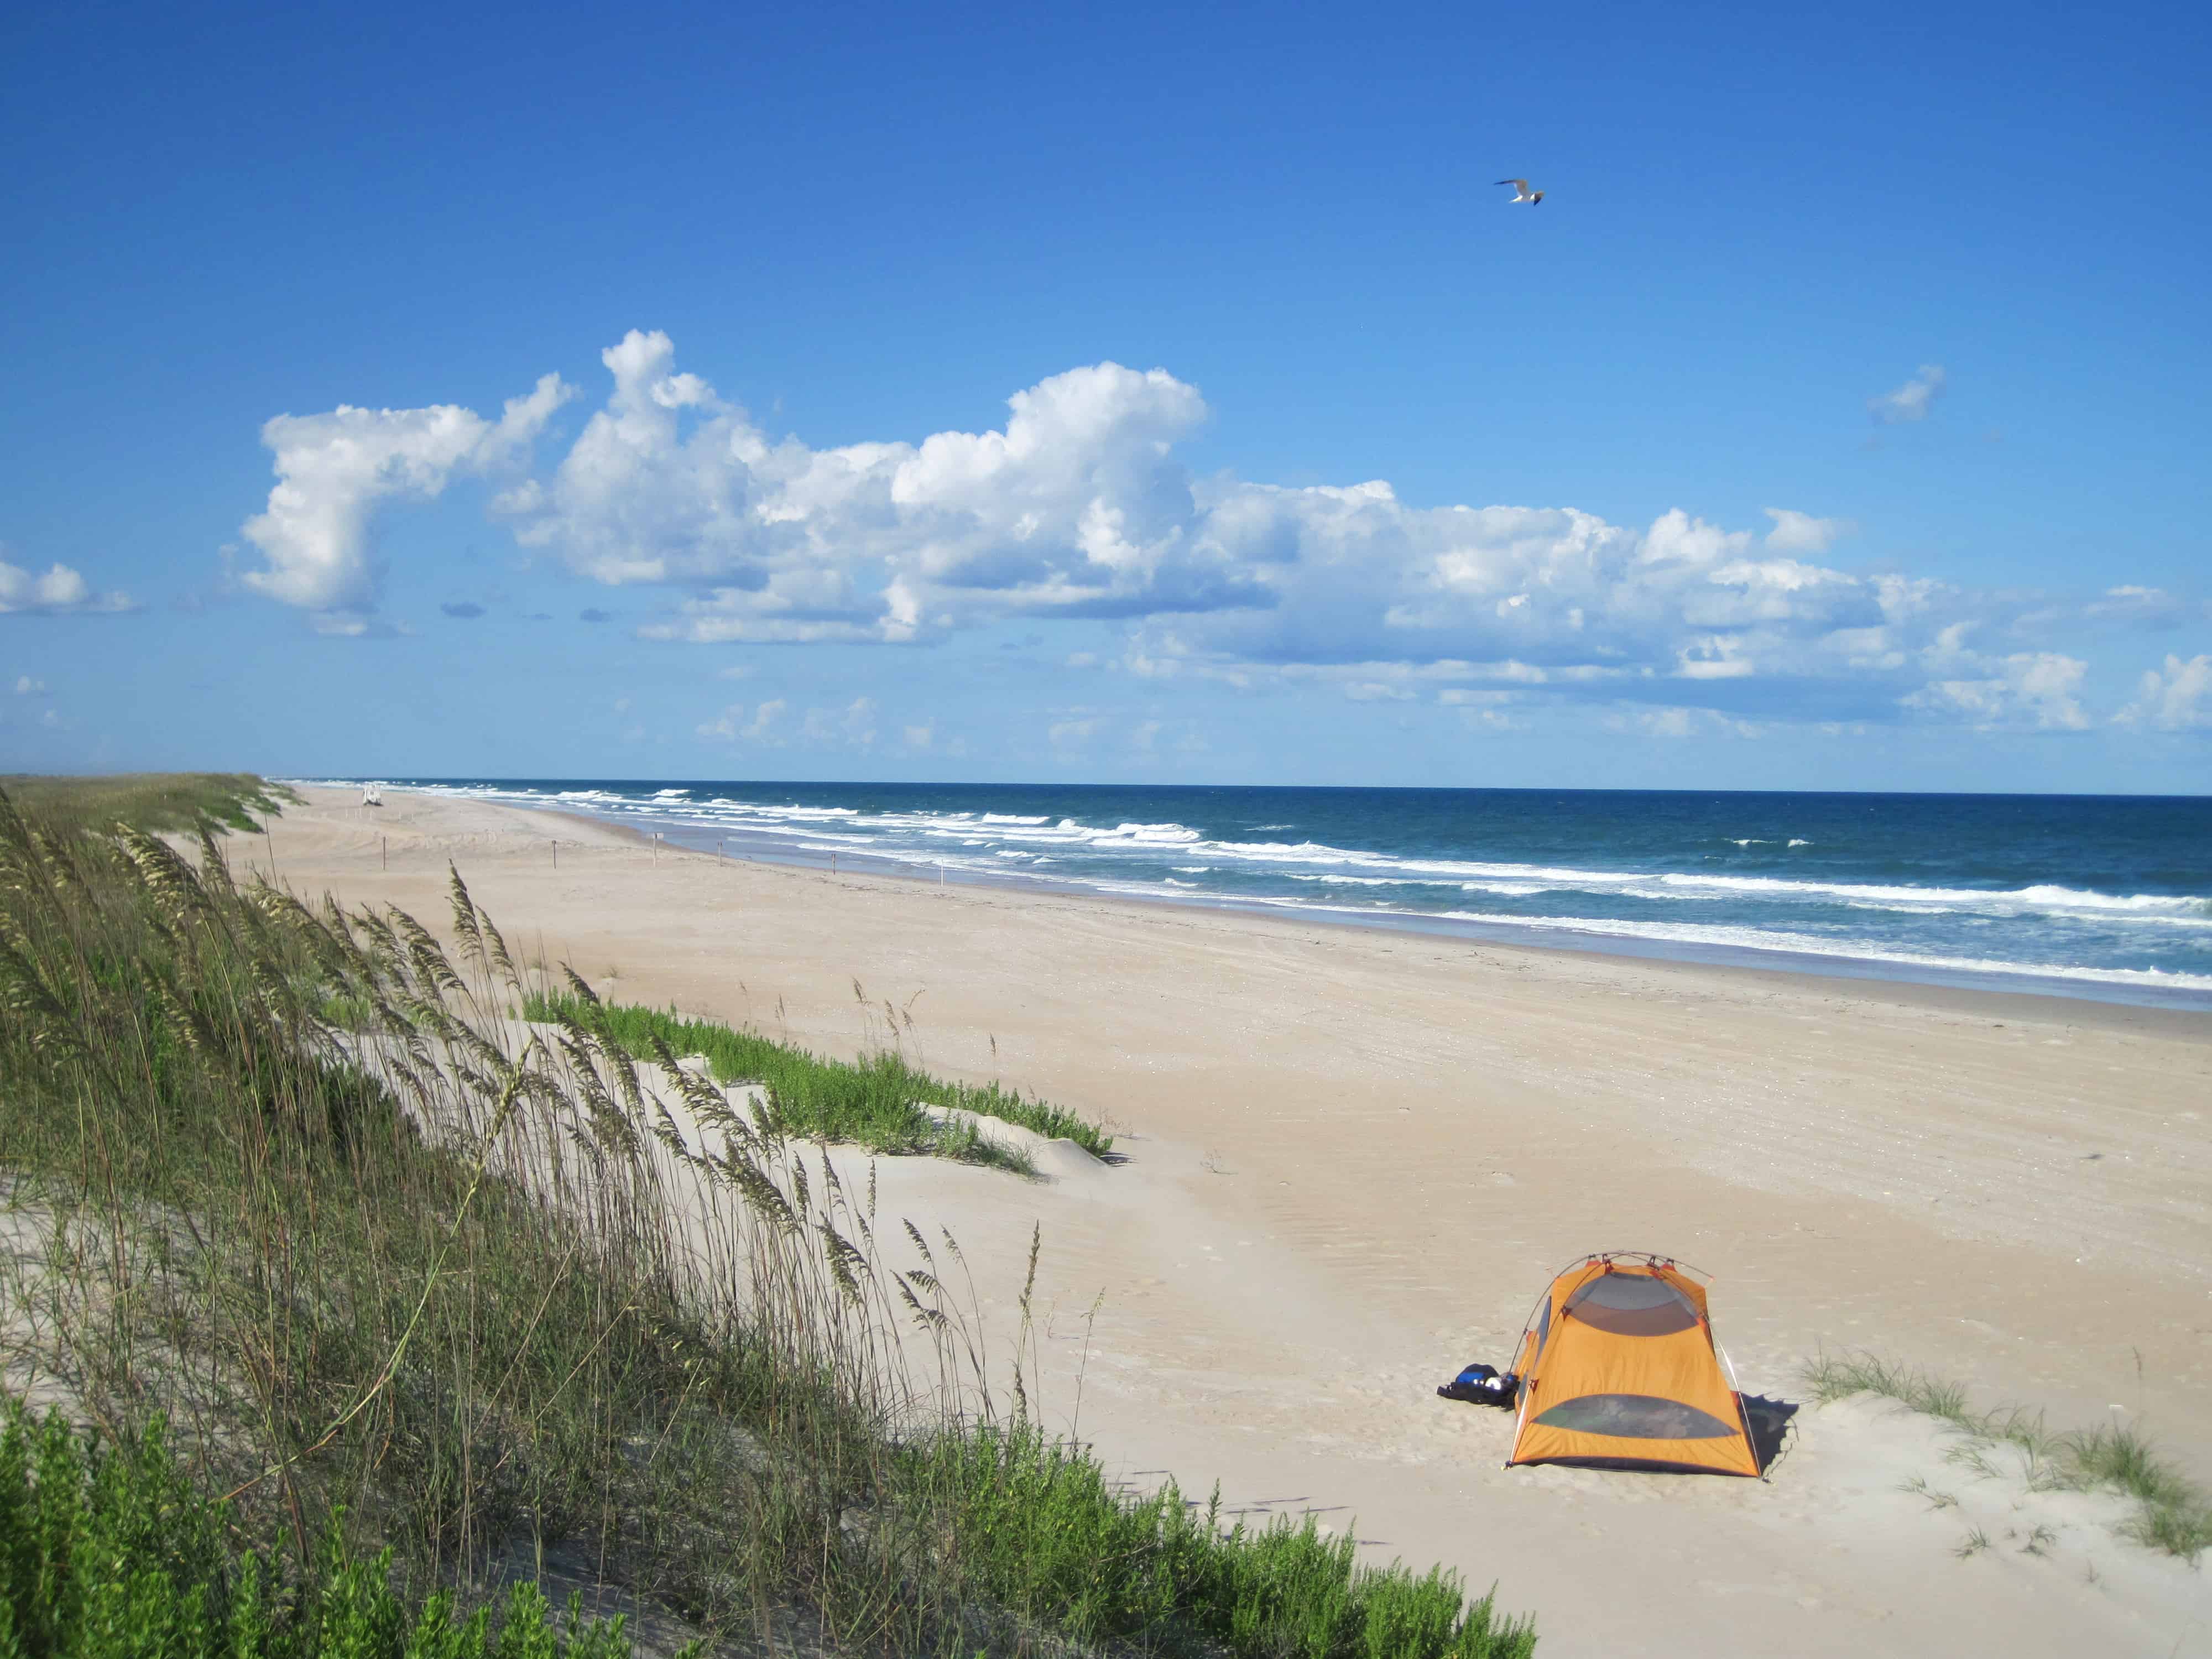 Fall is a great time for coastal camping at Cape Lookout National Seashore in the Southern Outer Banks of North Carolina. ©Kelly Douglass